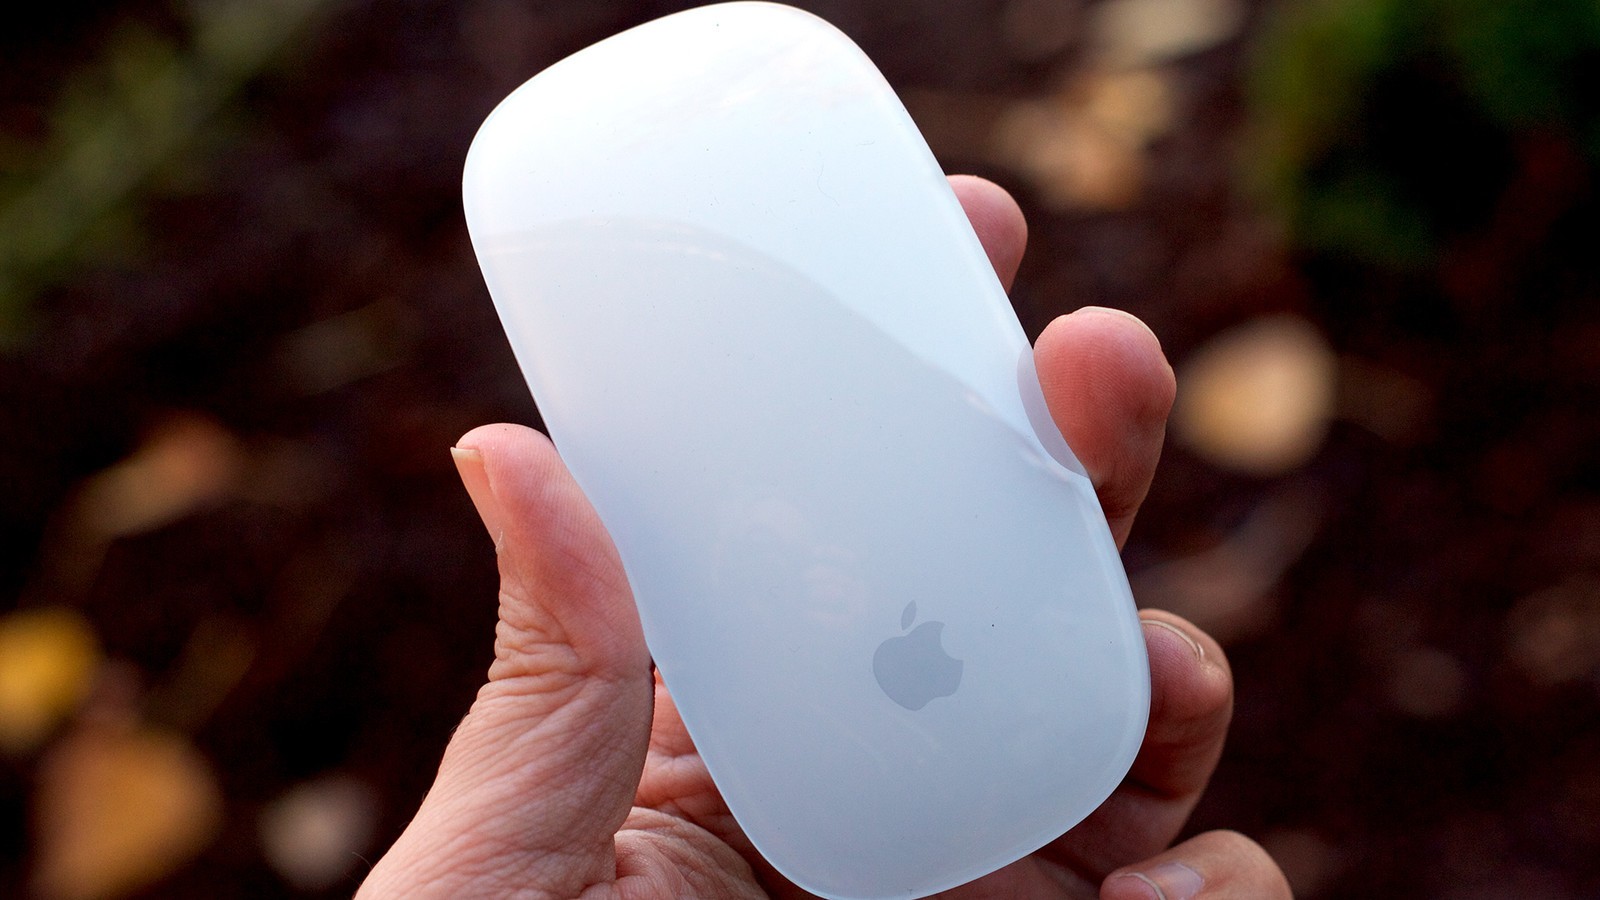 how much for a mac mouse?